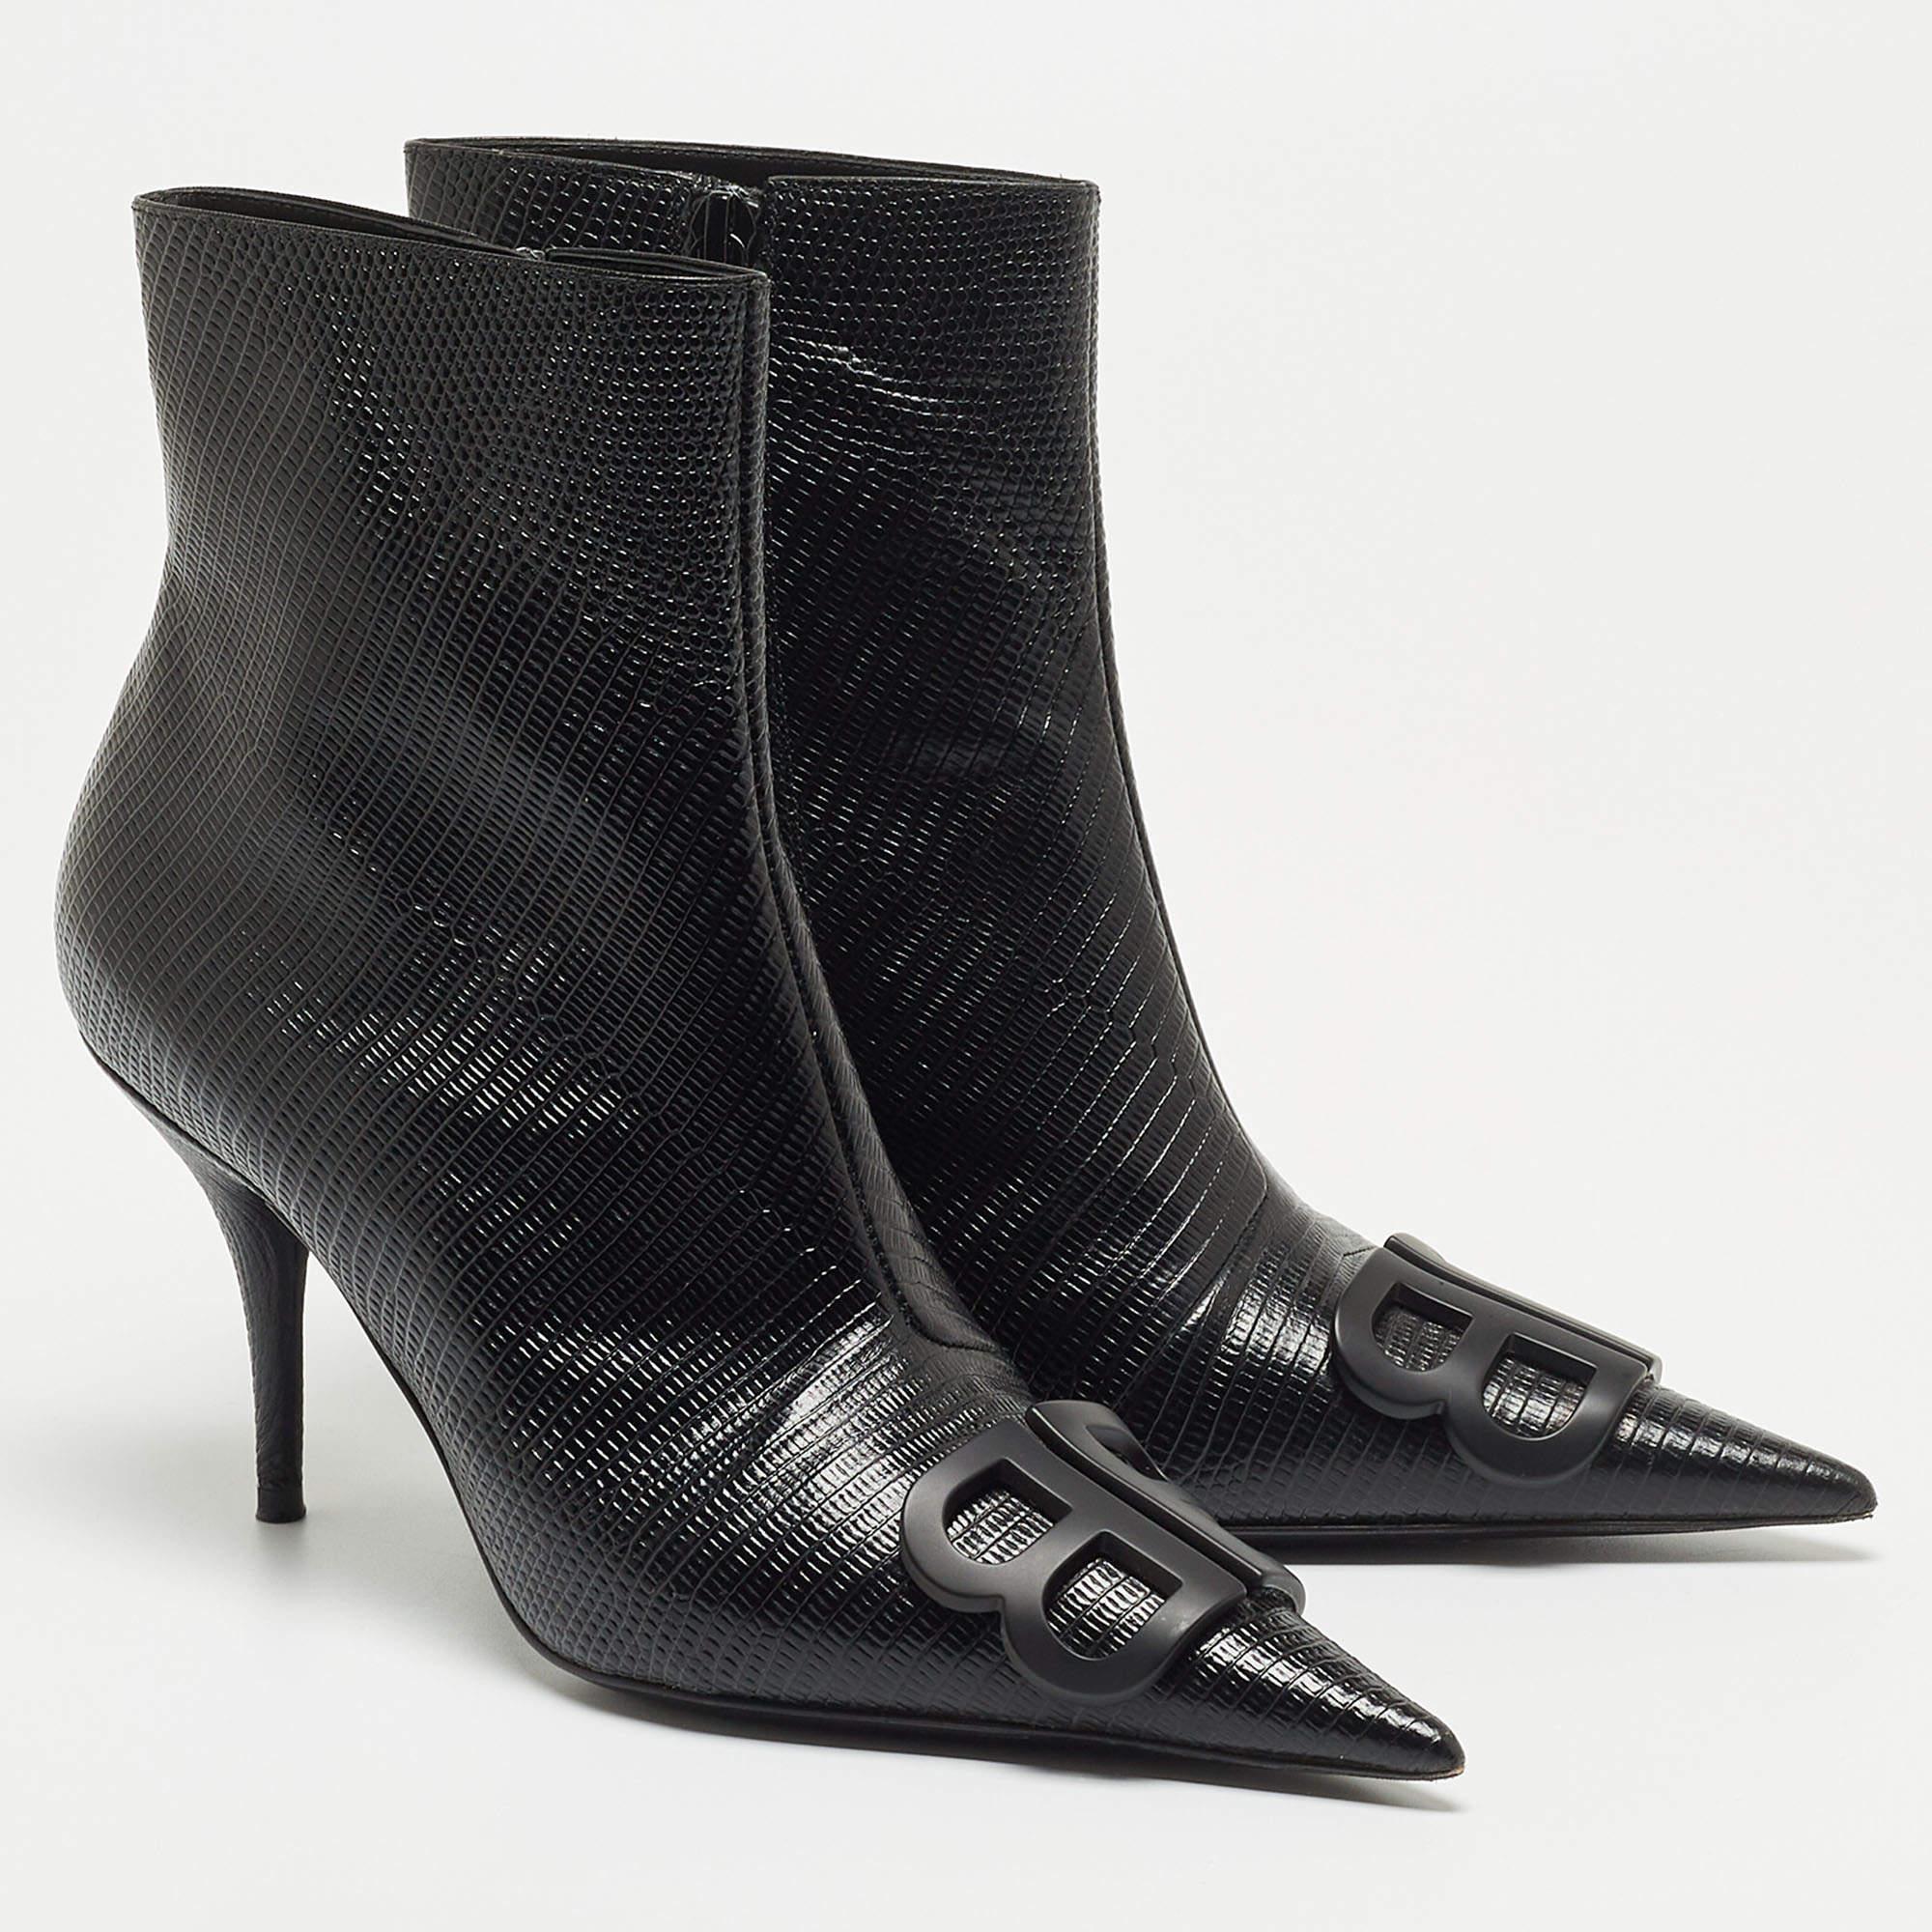 Perfectly sewn and finished to ensure an elegant look and fit, these Balenciaga boots are a purchase you'll love flaunting. They look great on the feet.

